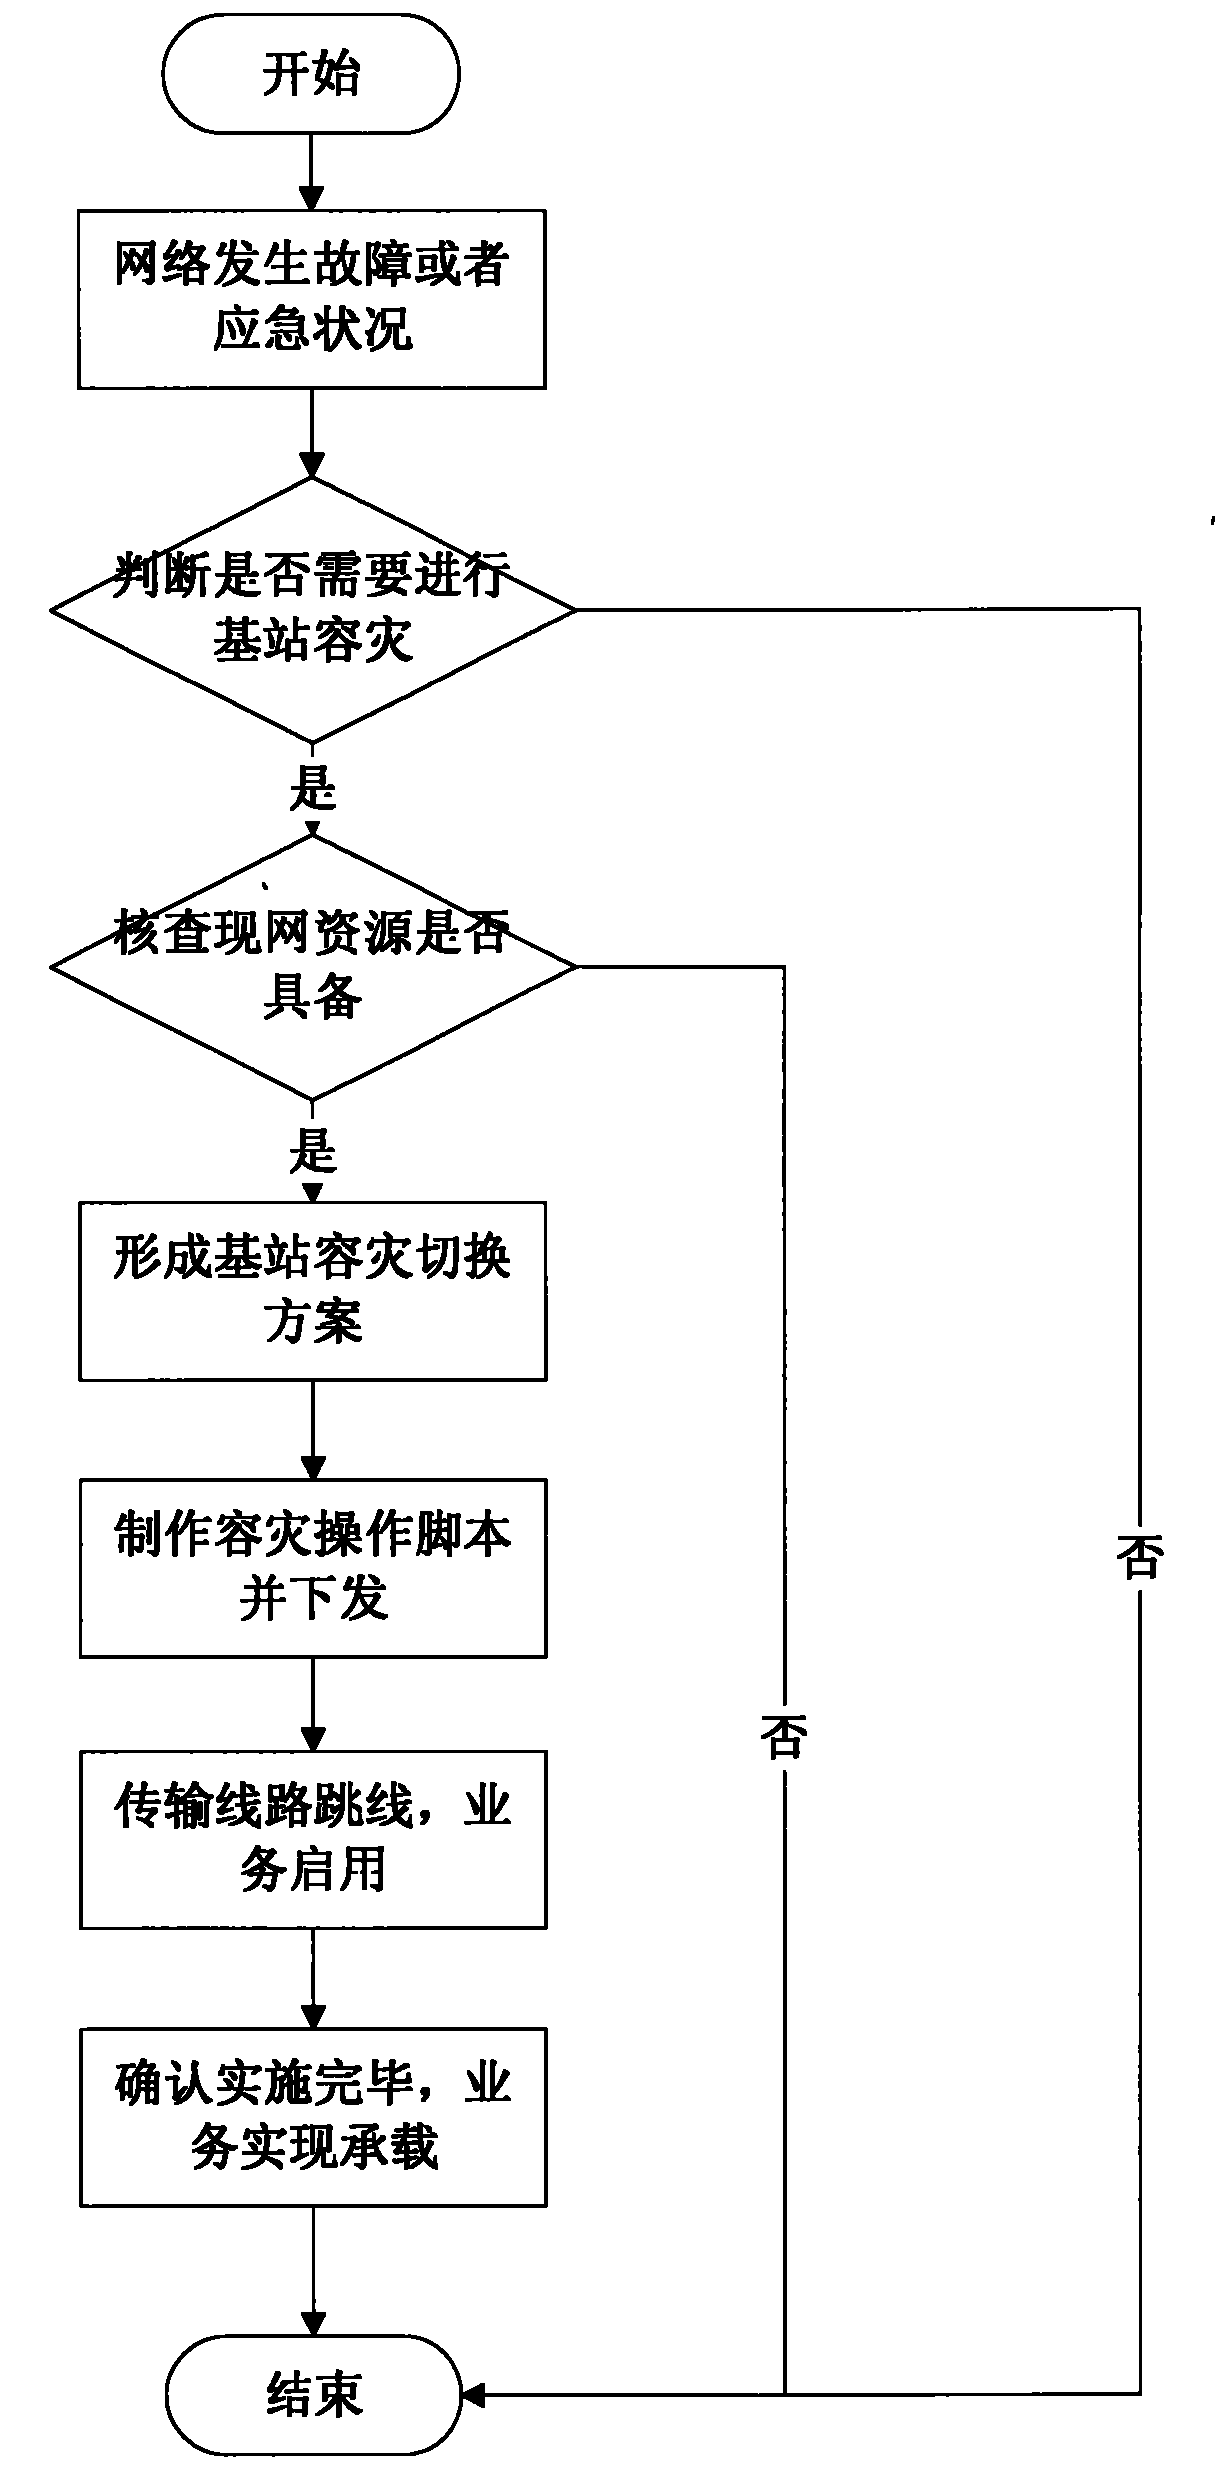 Method for quickly tolerating disaster for base station in mobile communication network